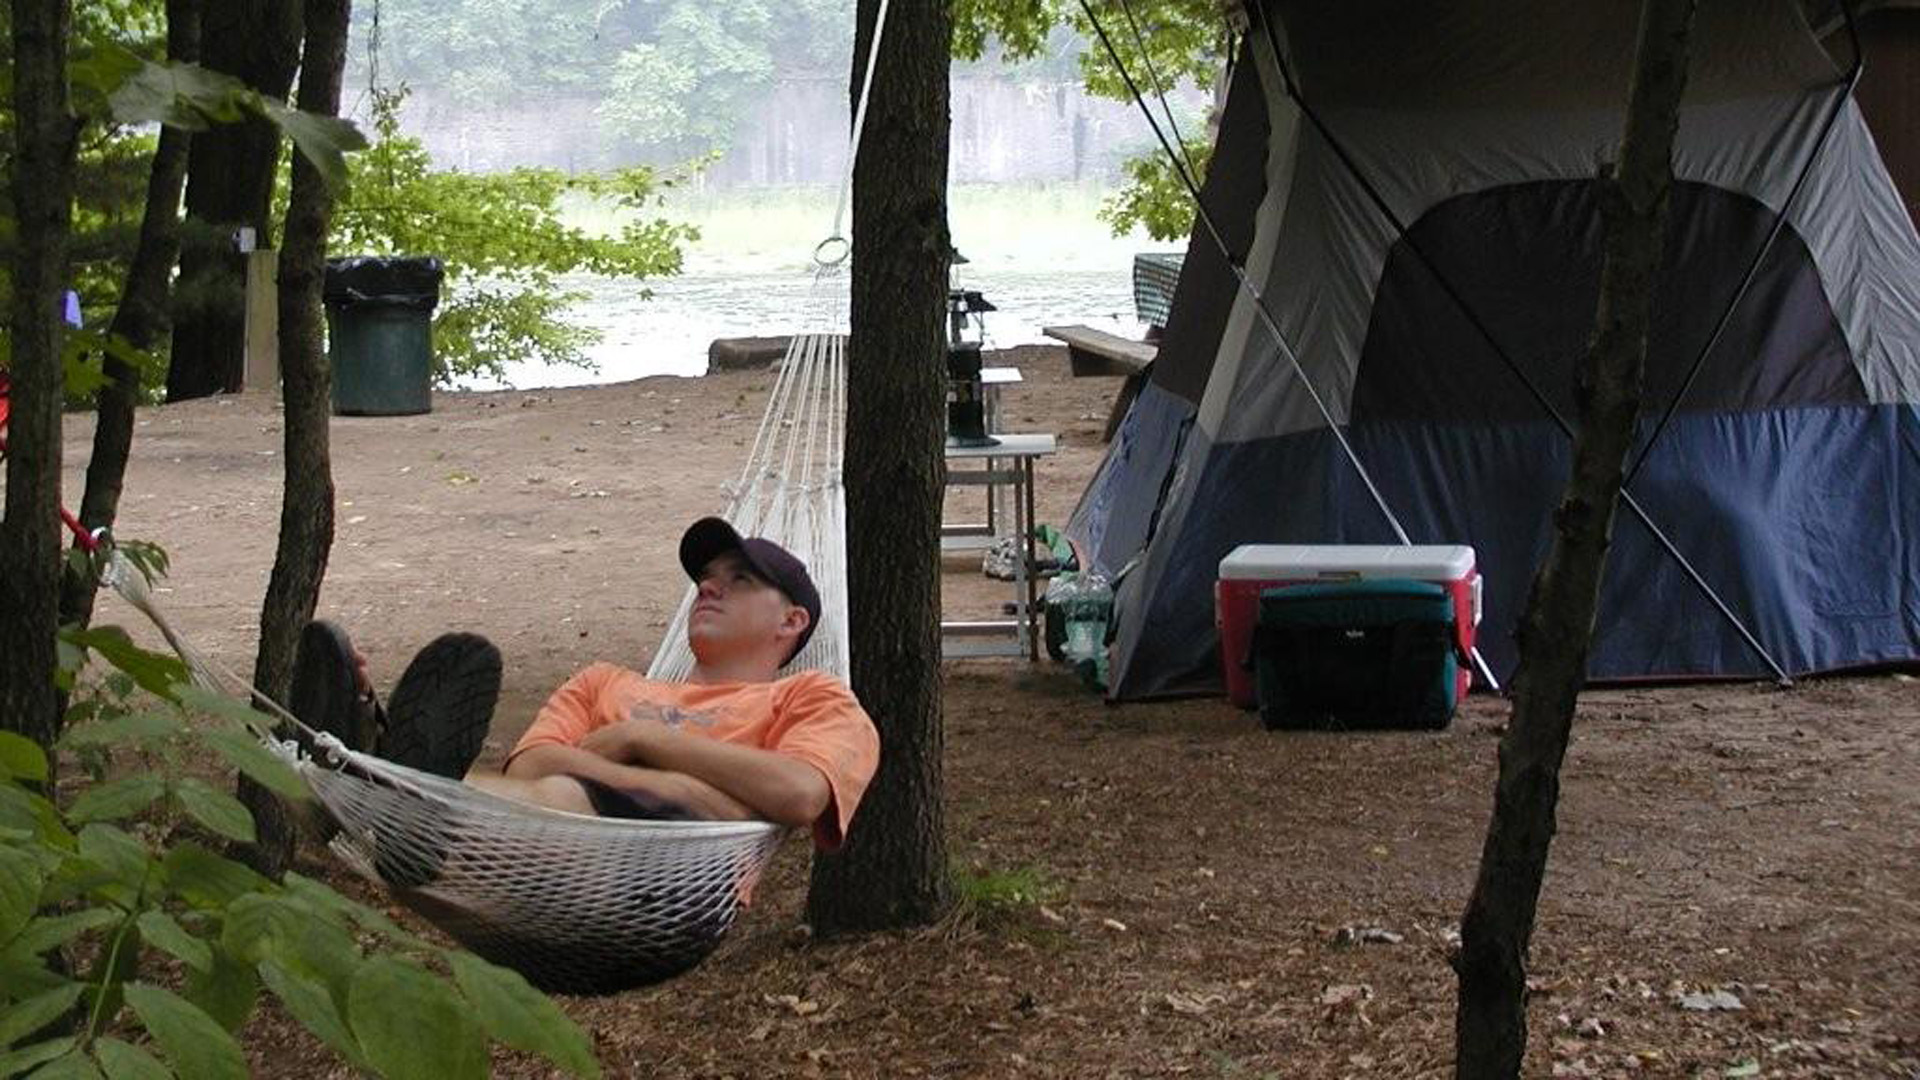 one of our camp sites along the Delaware River